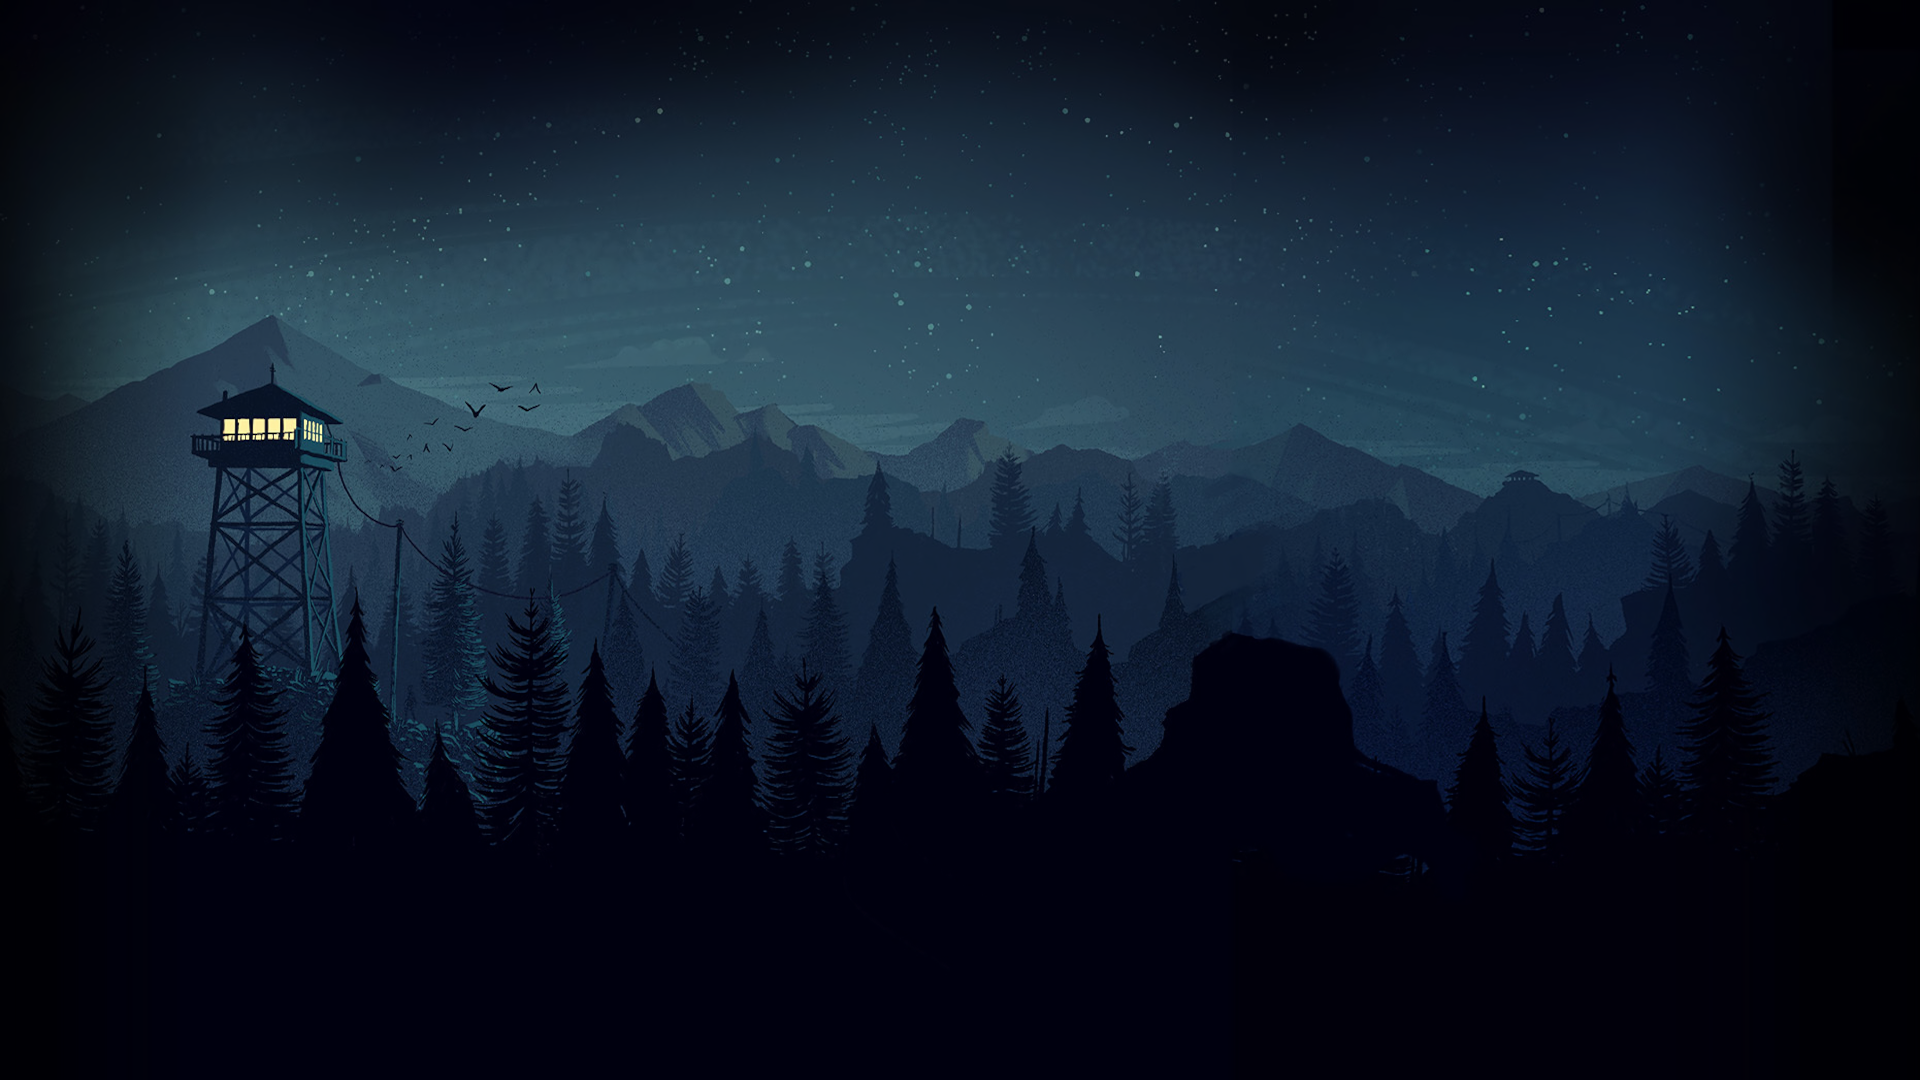 Firewatch Wallpapers, HD Firewatch Backgrounds, Free Images Download